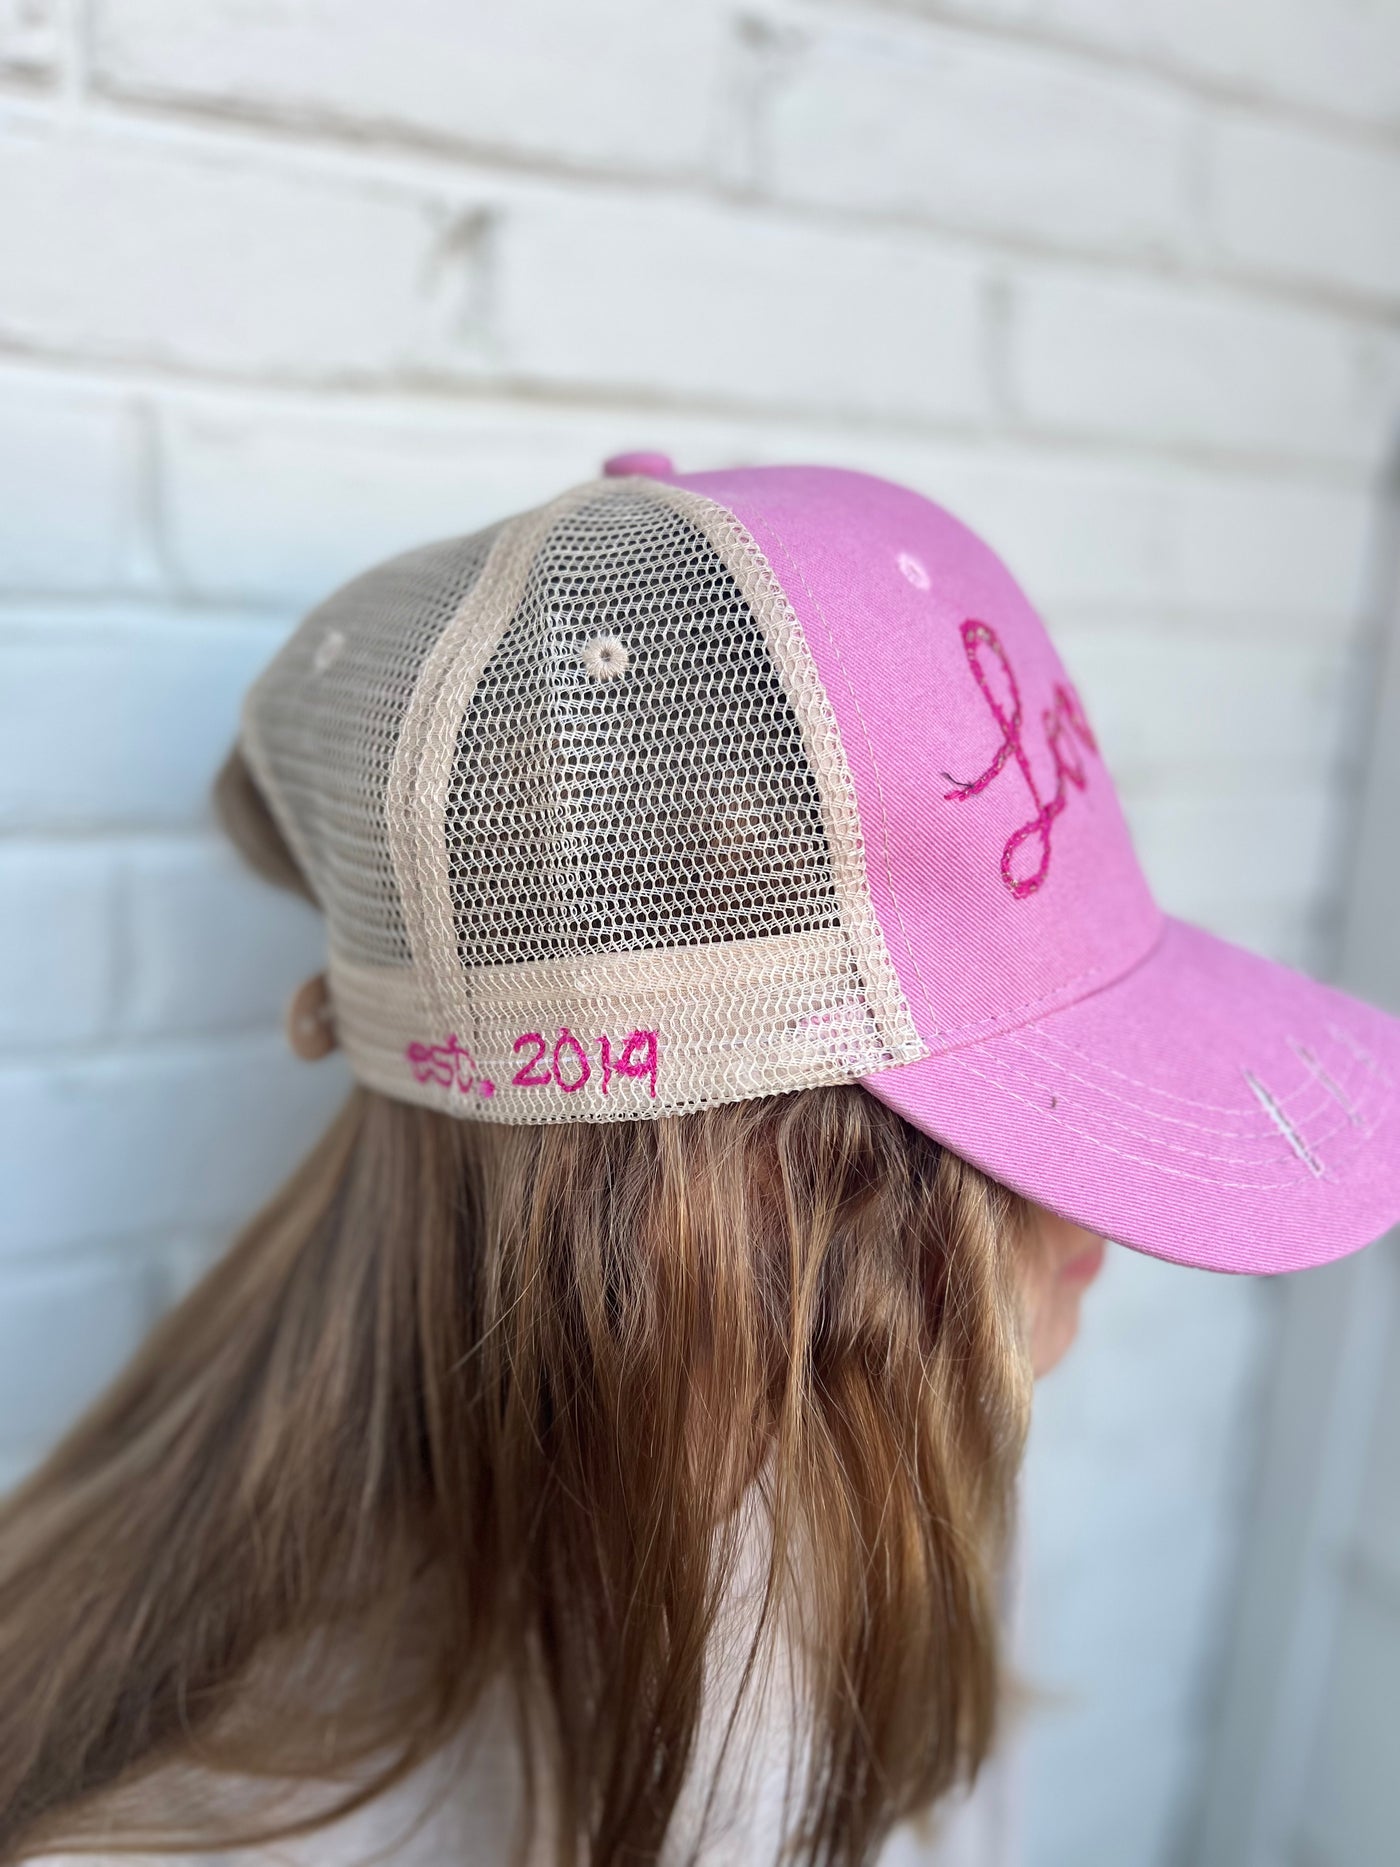 Taylor Canvas Front Trucker Hat